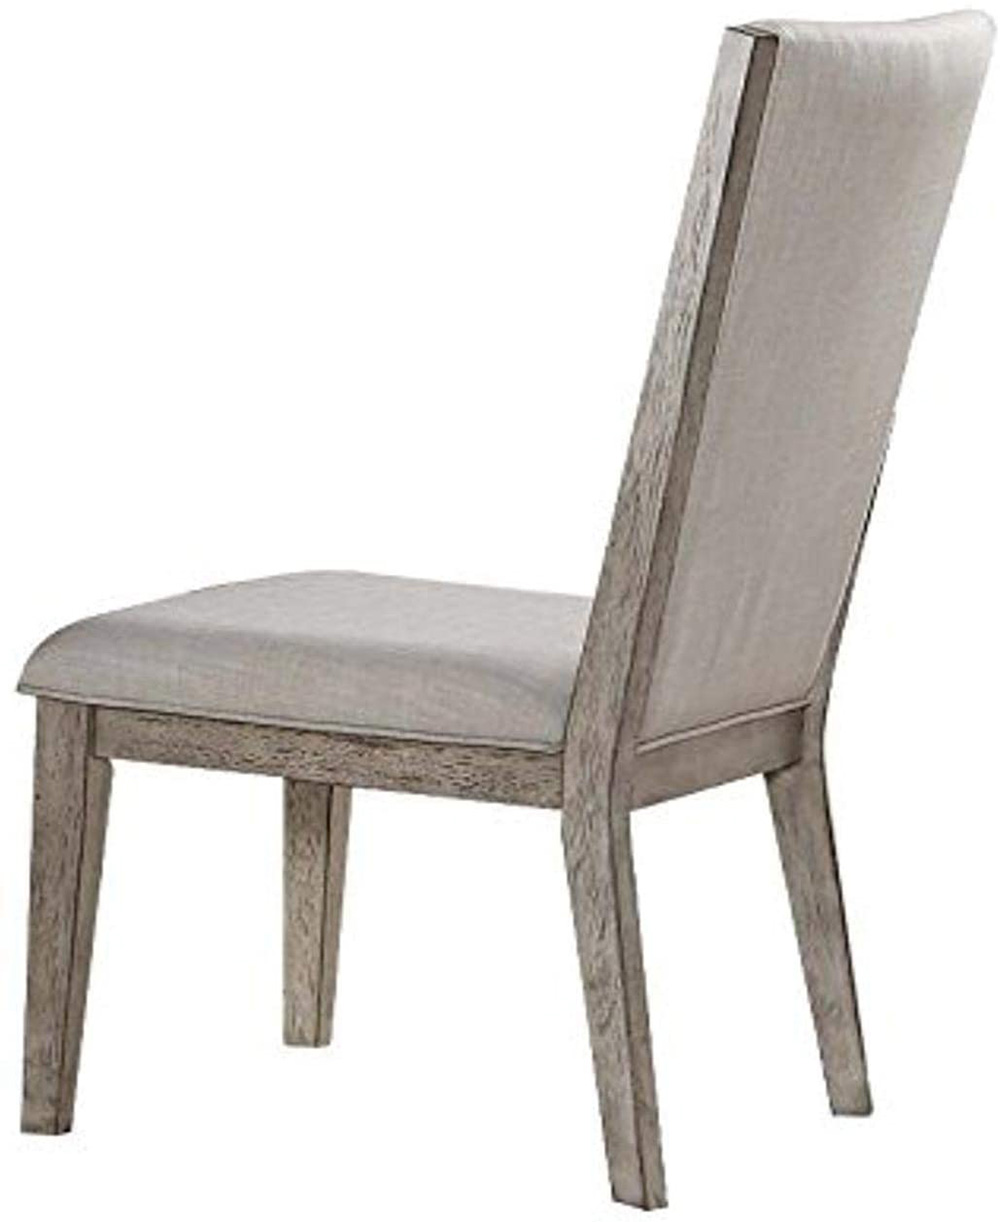 ACME Rocky Fabric Upholstered Dining Chair Set of 2, with High Backrest, and Wood Legs, for Restaurant, Cafe, Tavern, Office, Living Room - Gray